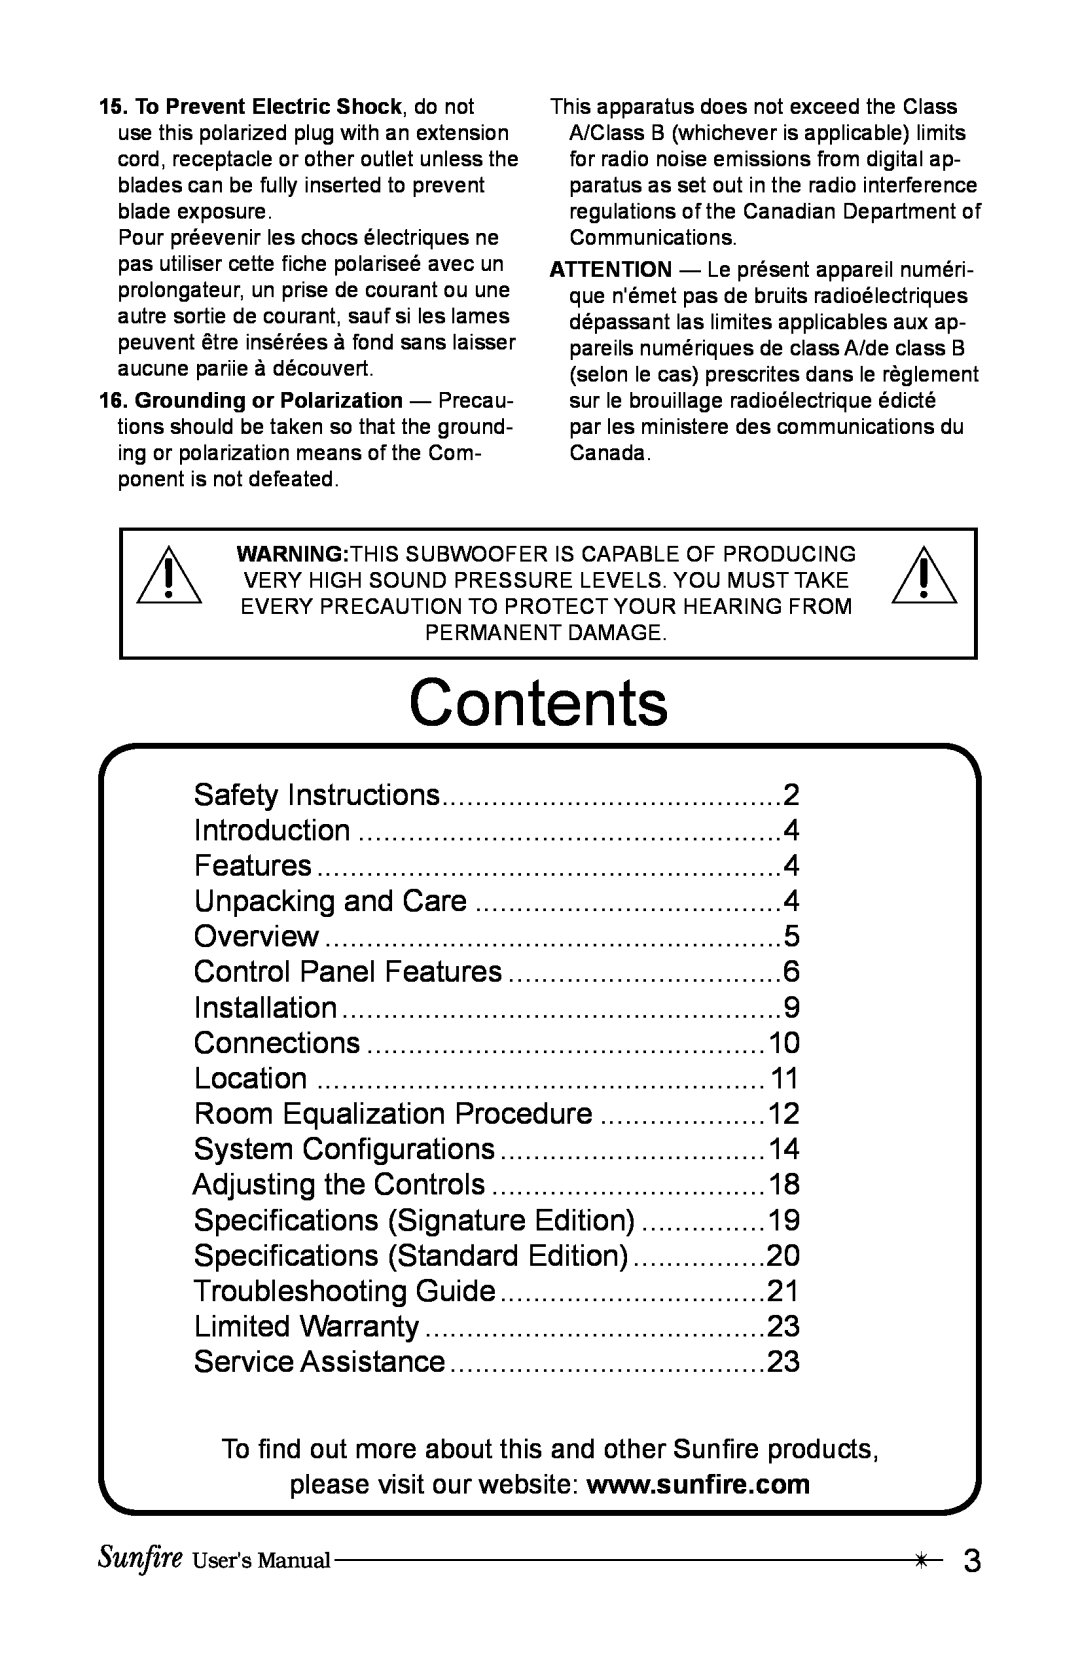 Sunfire True Subwoofer Signature and Standard Version user manual Contents 